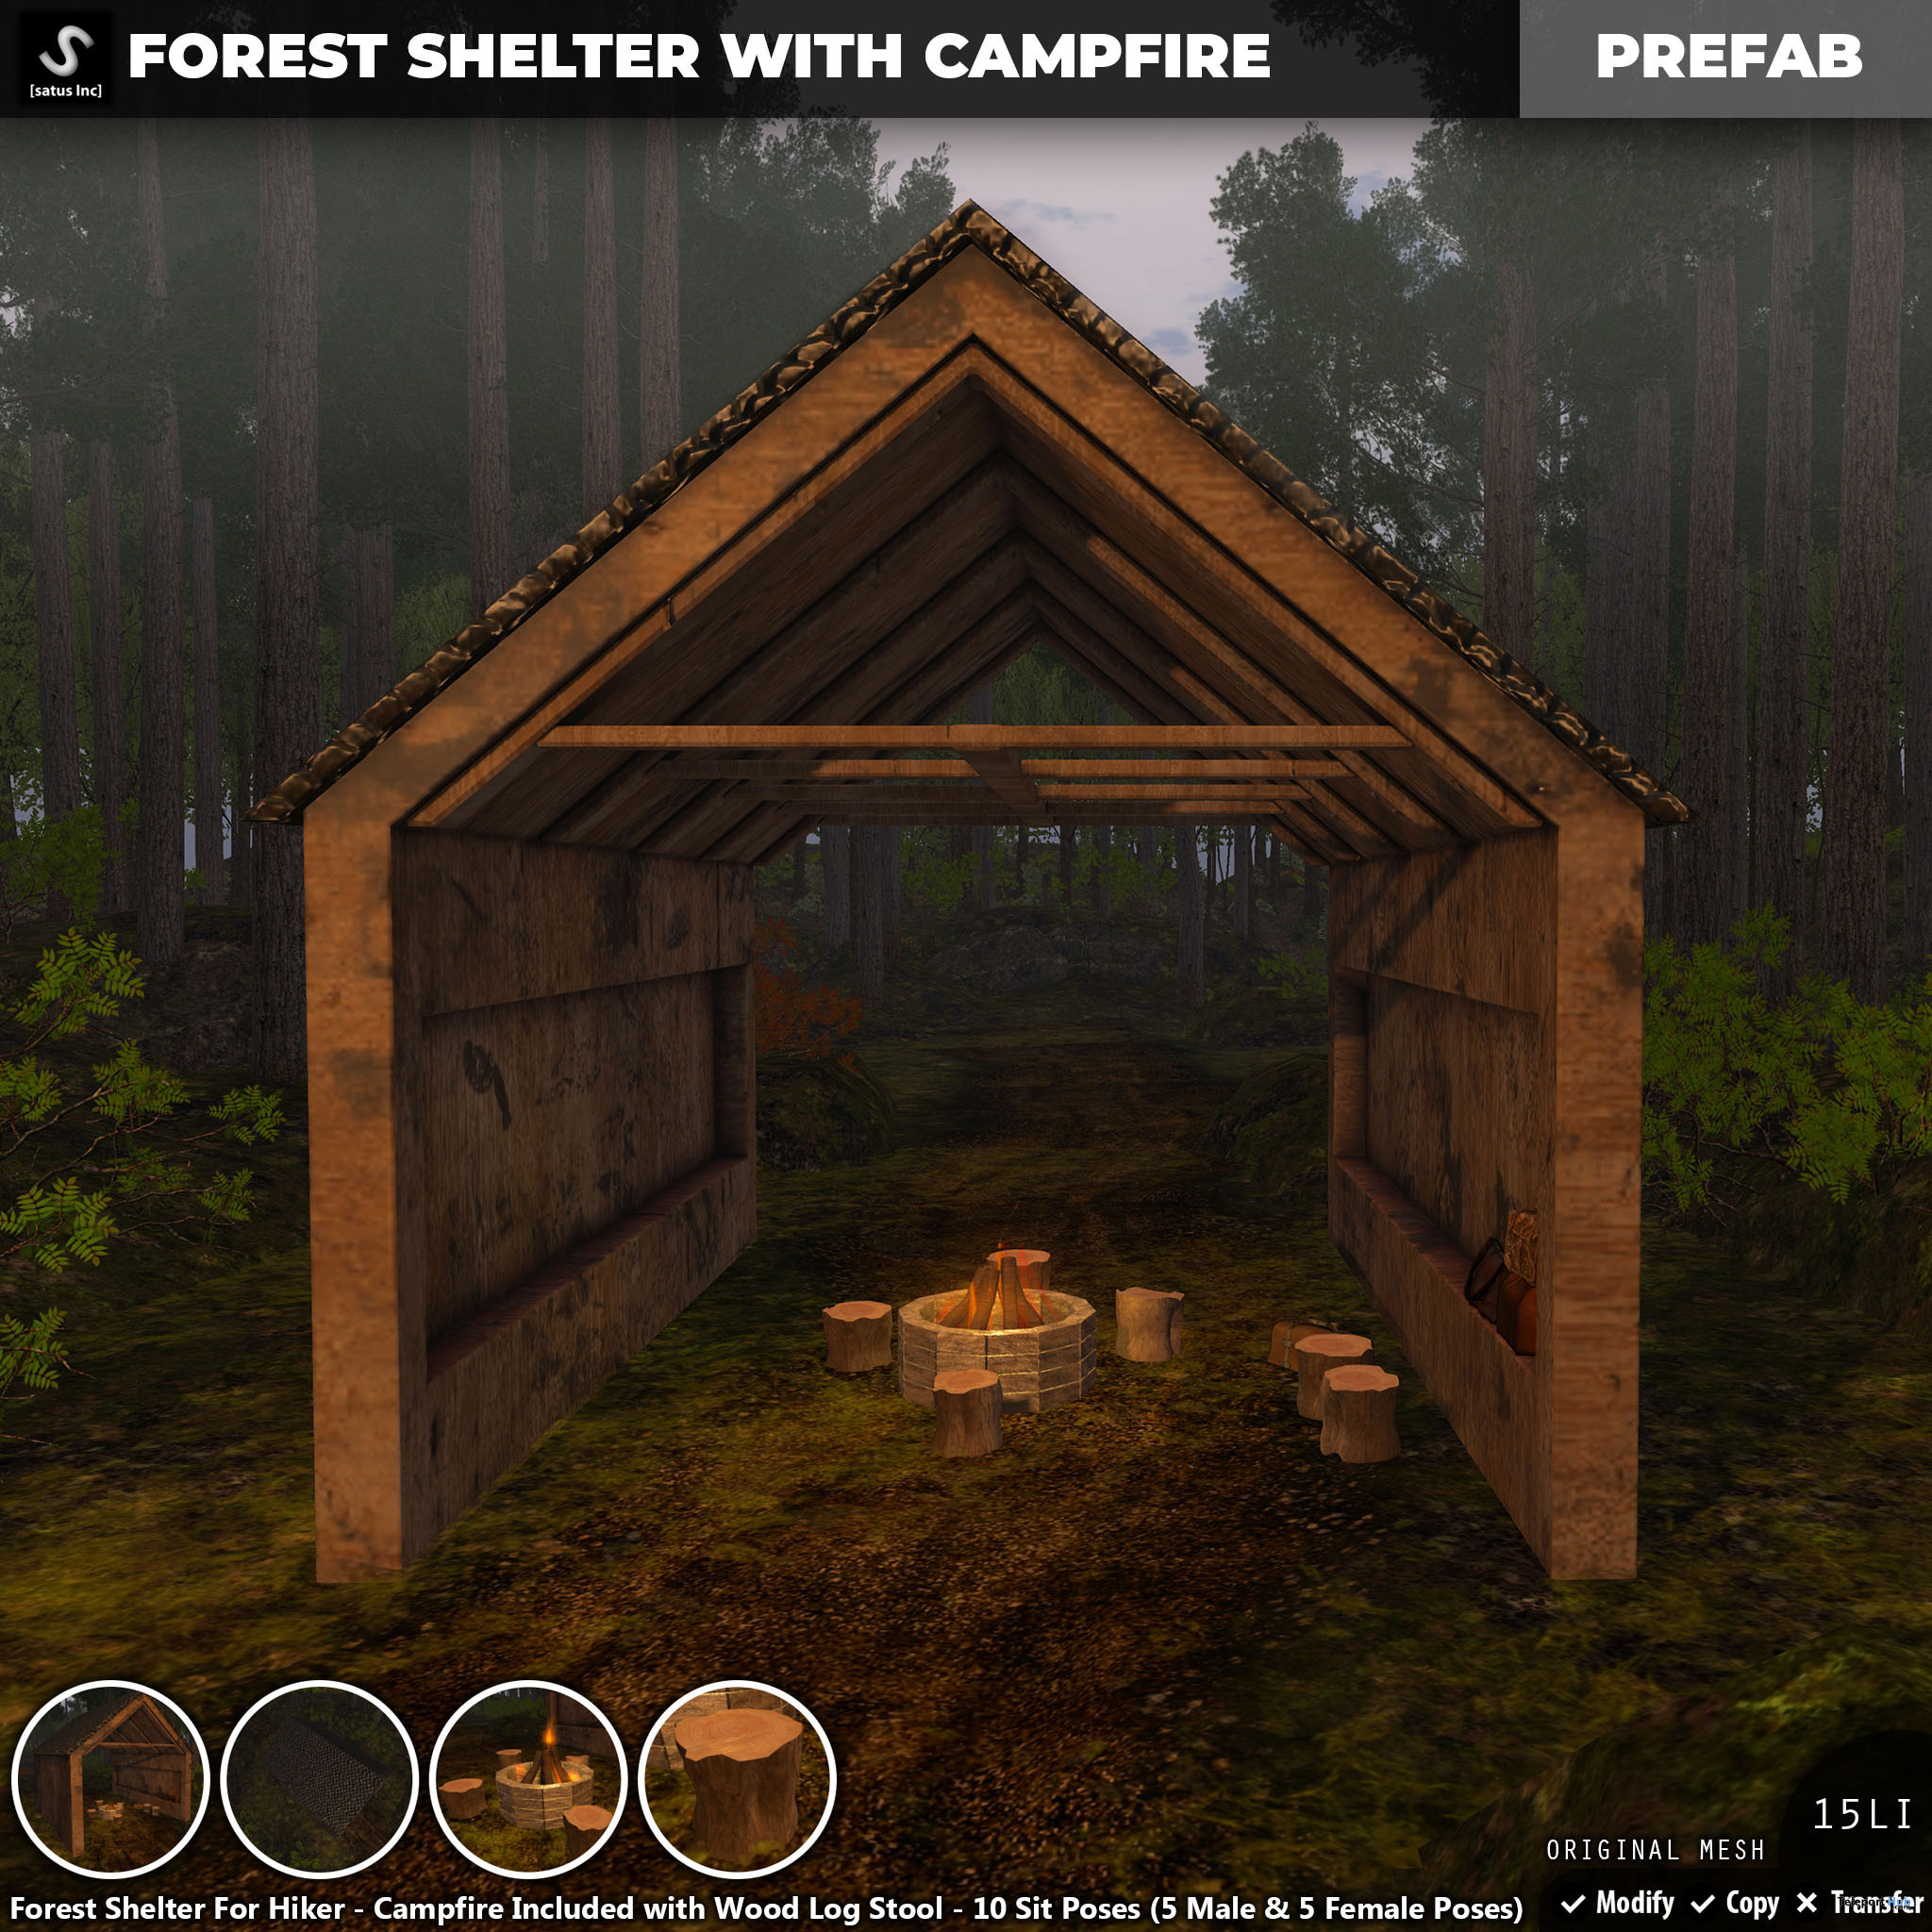 New Release: Forest Shelter With Campfire by [satus Inc] - Teleport Hub - teleporthub.com